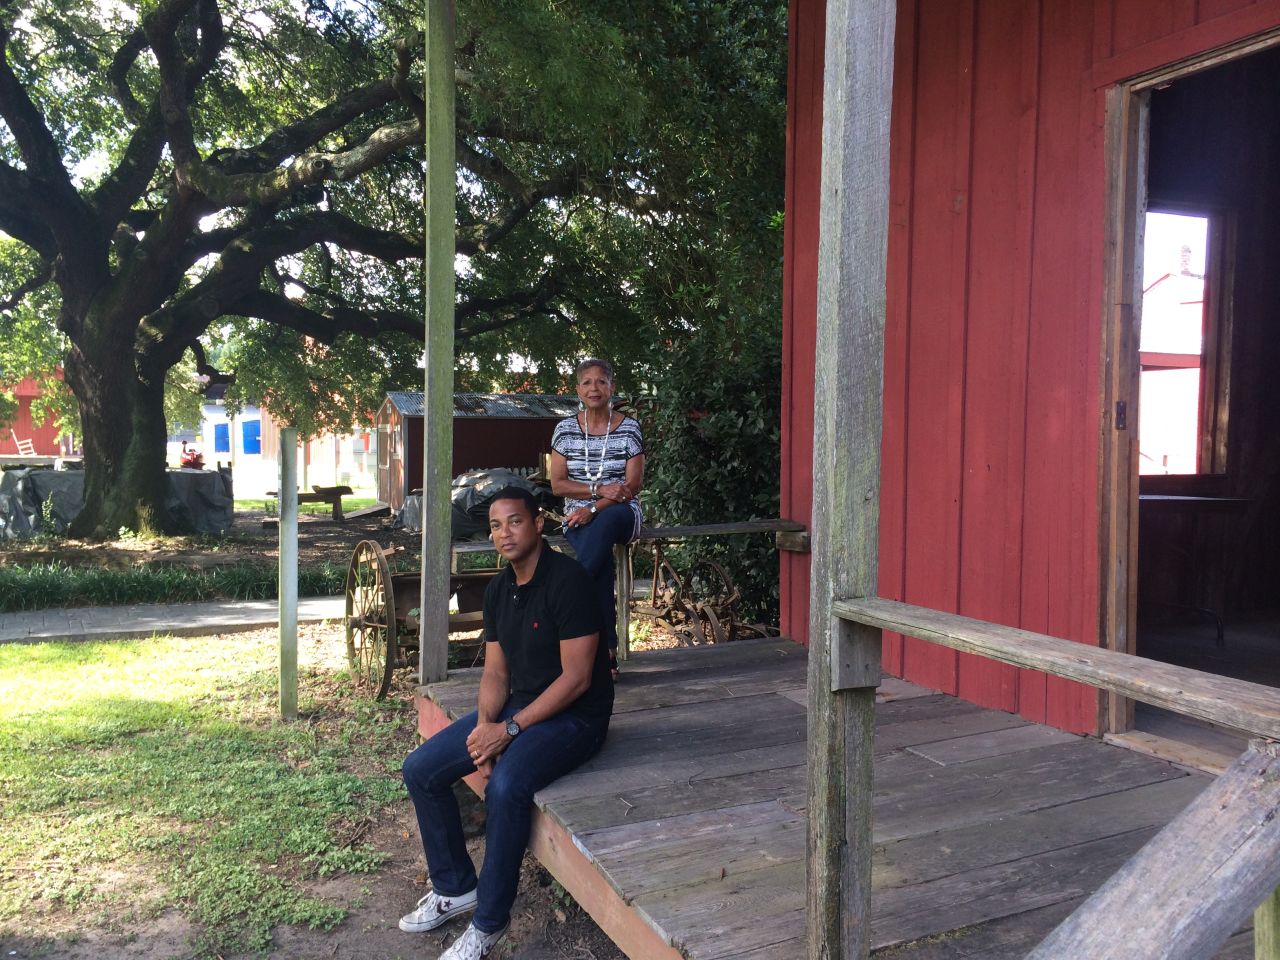 Lemon and his mom visit a former slave cabin at the West Baton Rouge Museum in Louisiana. Lemon's ancestors arrived in Louisiana as slaves in the early 1800s.